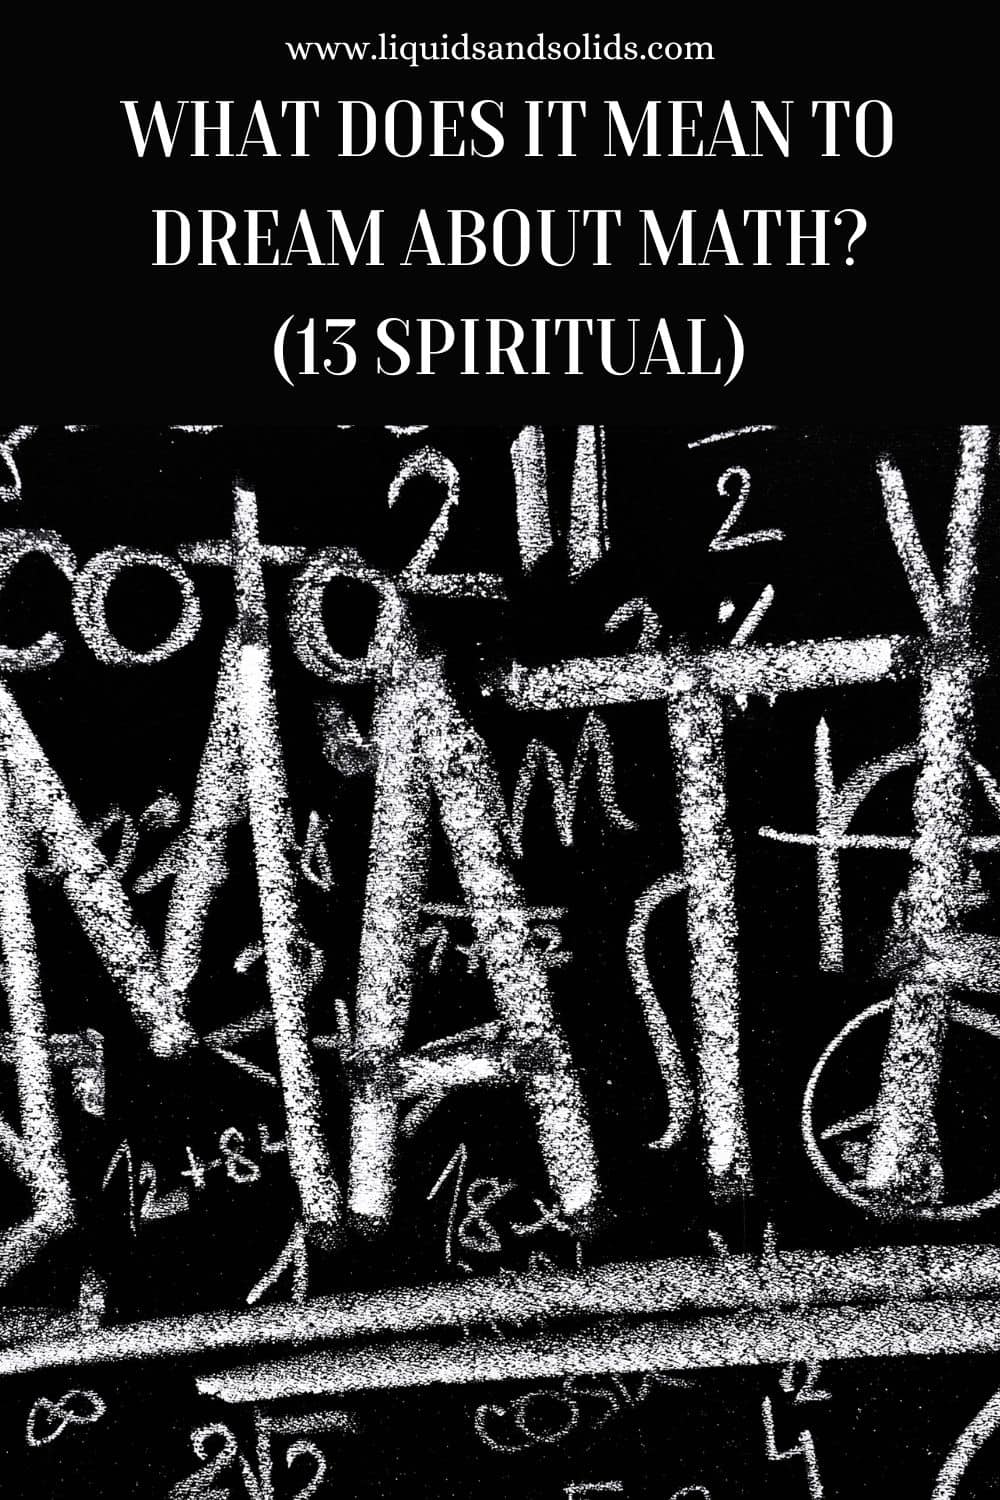 What Does It Mean To Dream About Math? (13 Spiritual)